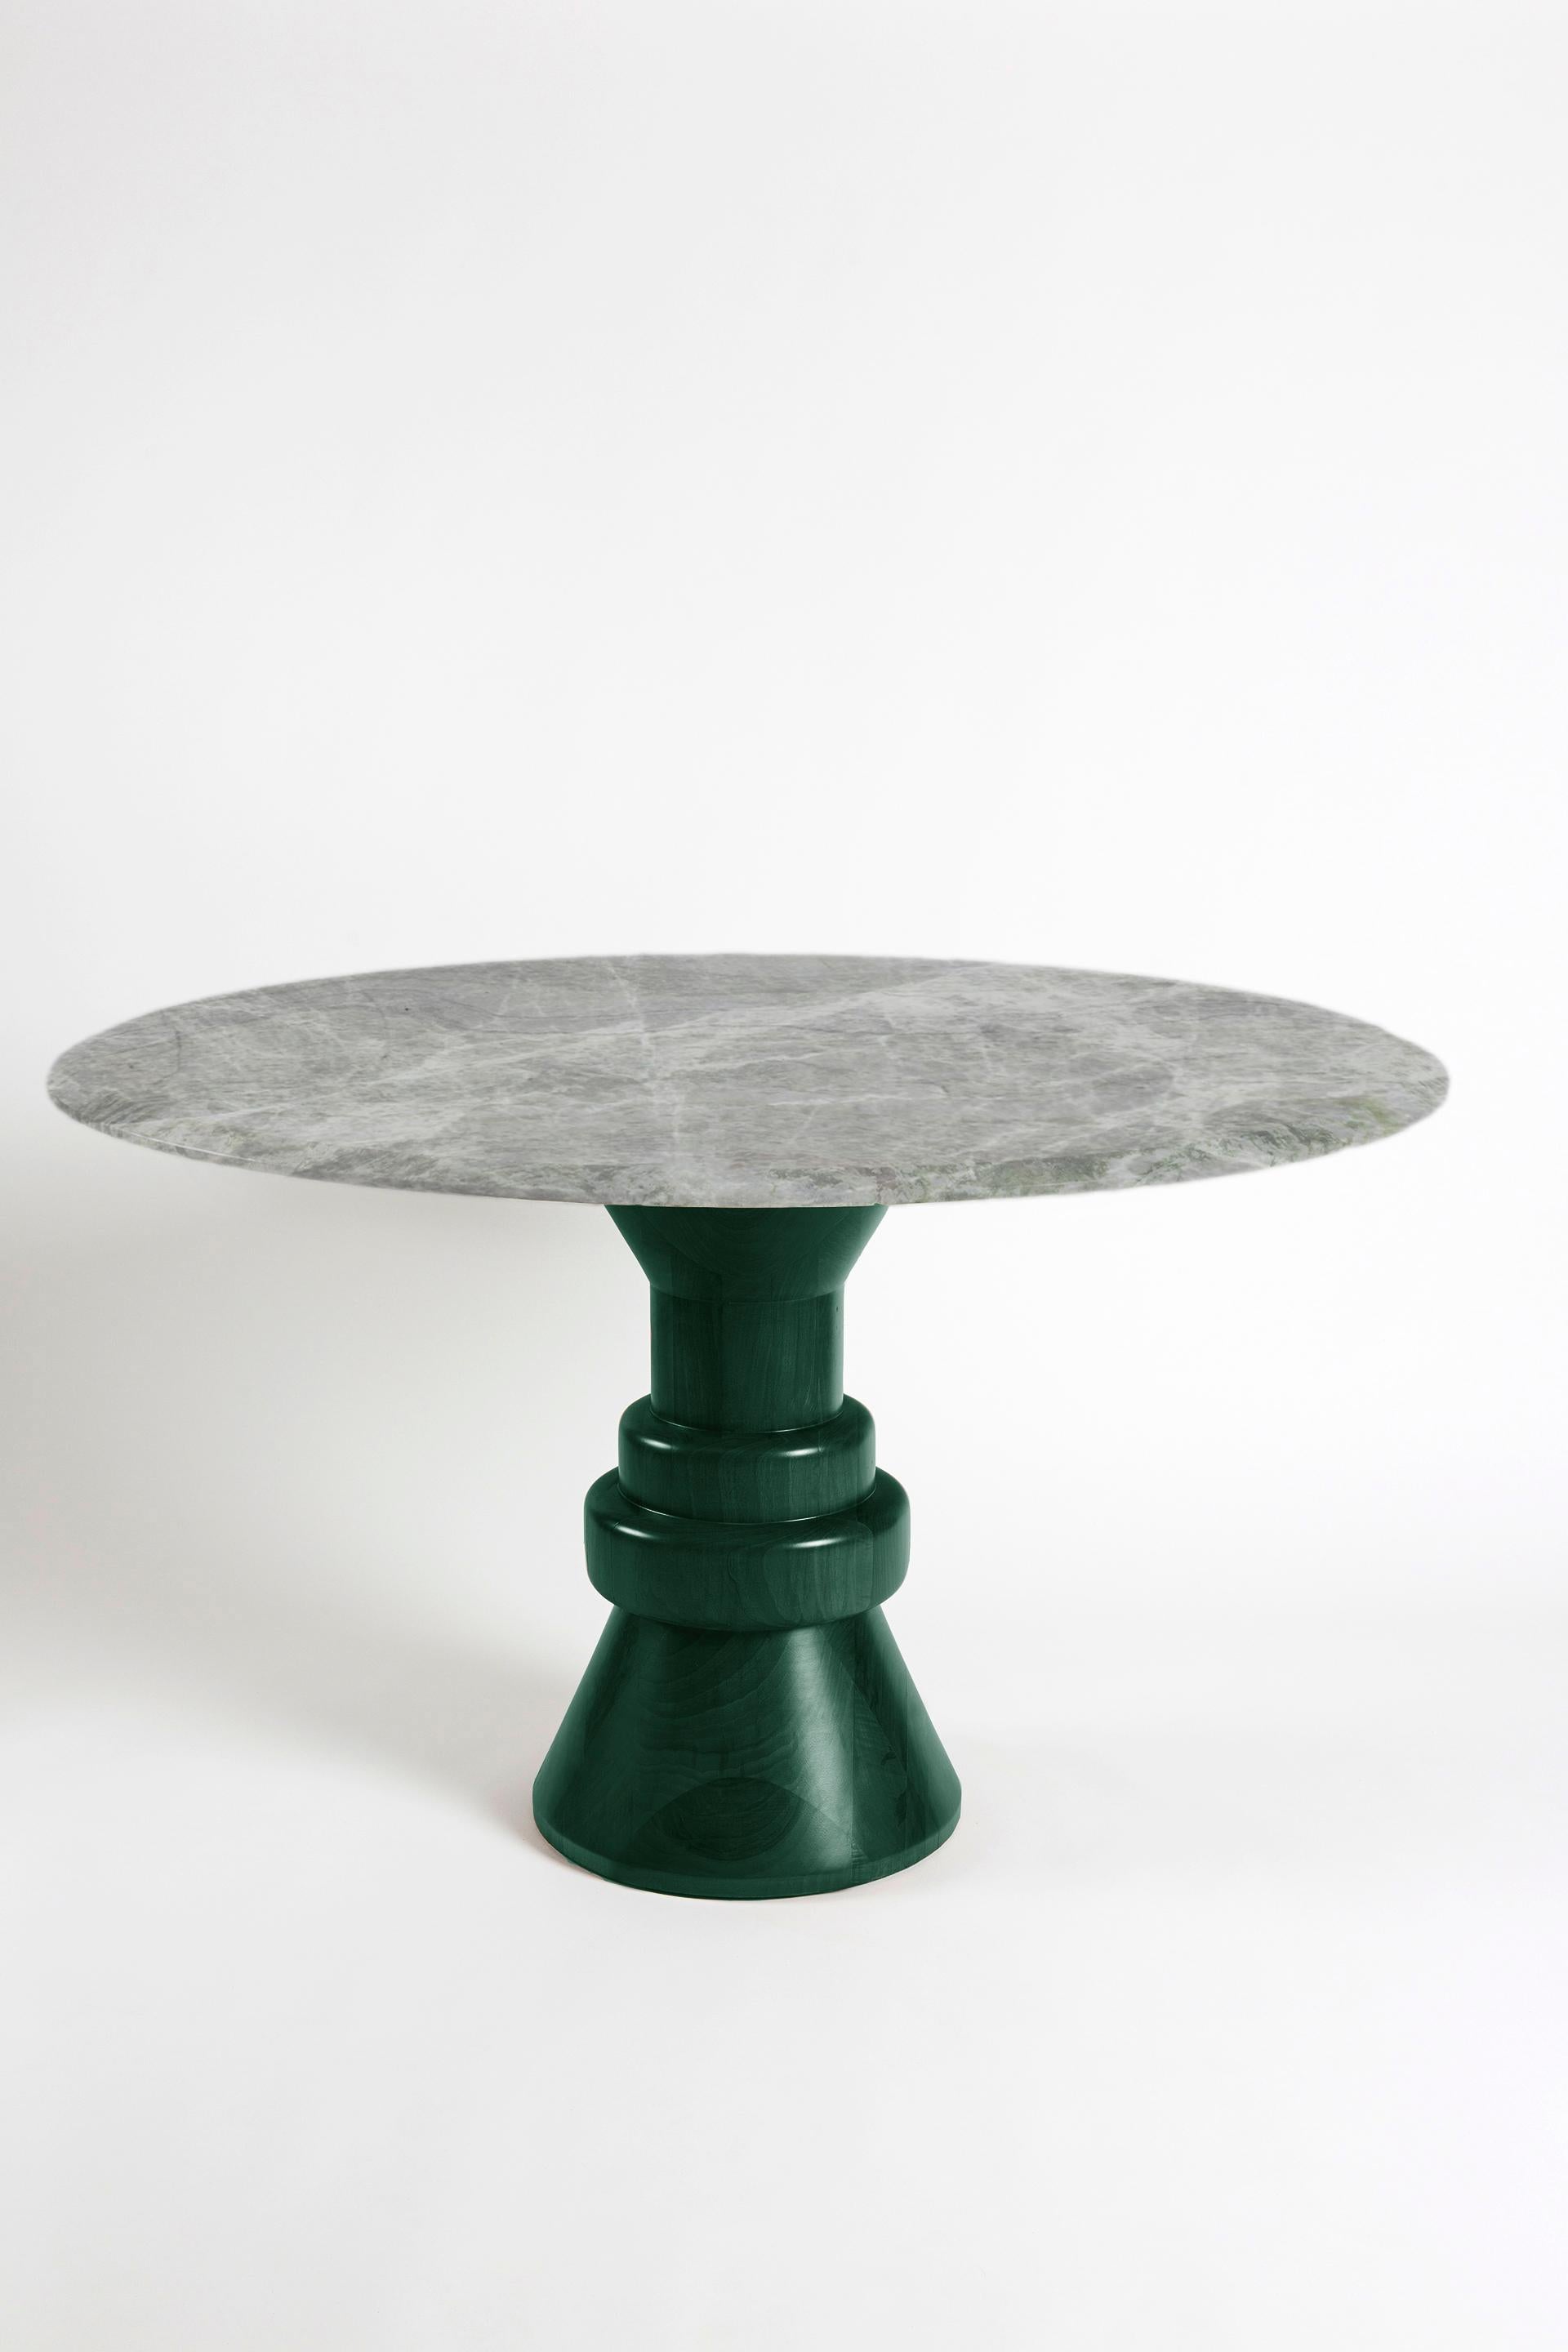 21st Century Cream Marble Round Dining Table with Sculptural Wooden Base For Sale 3